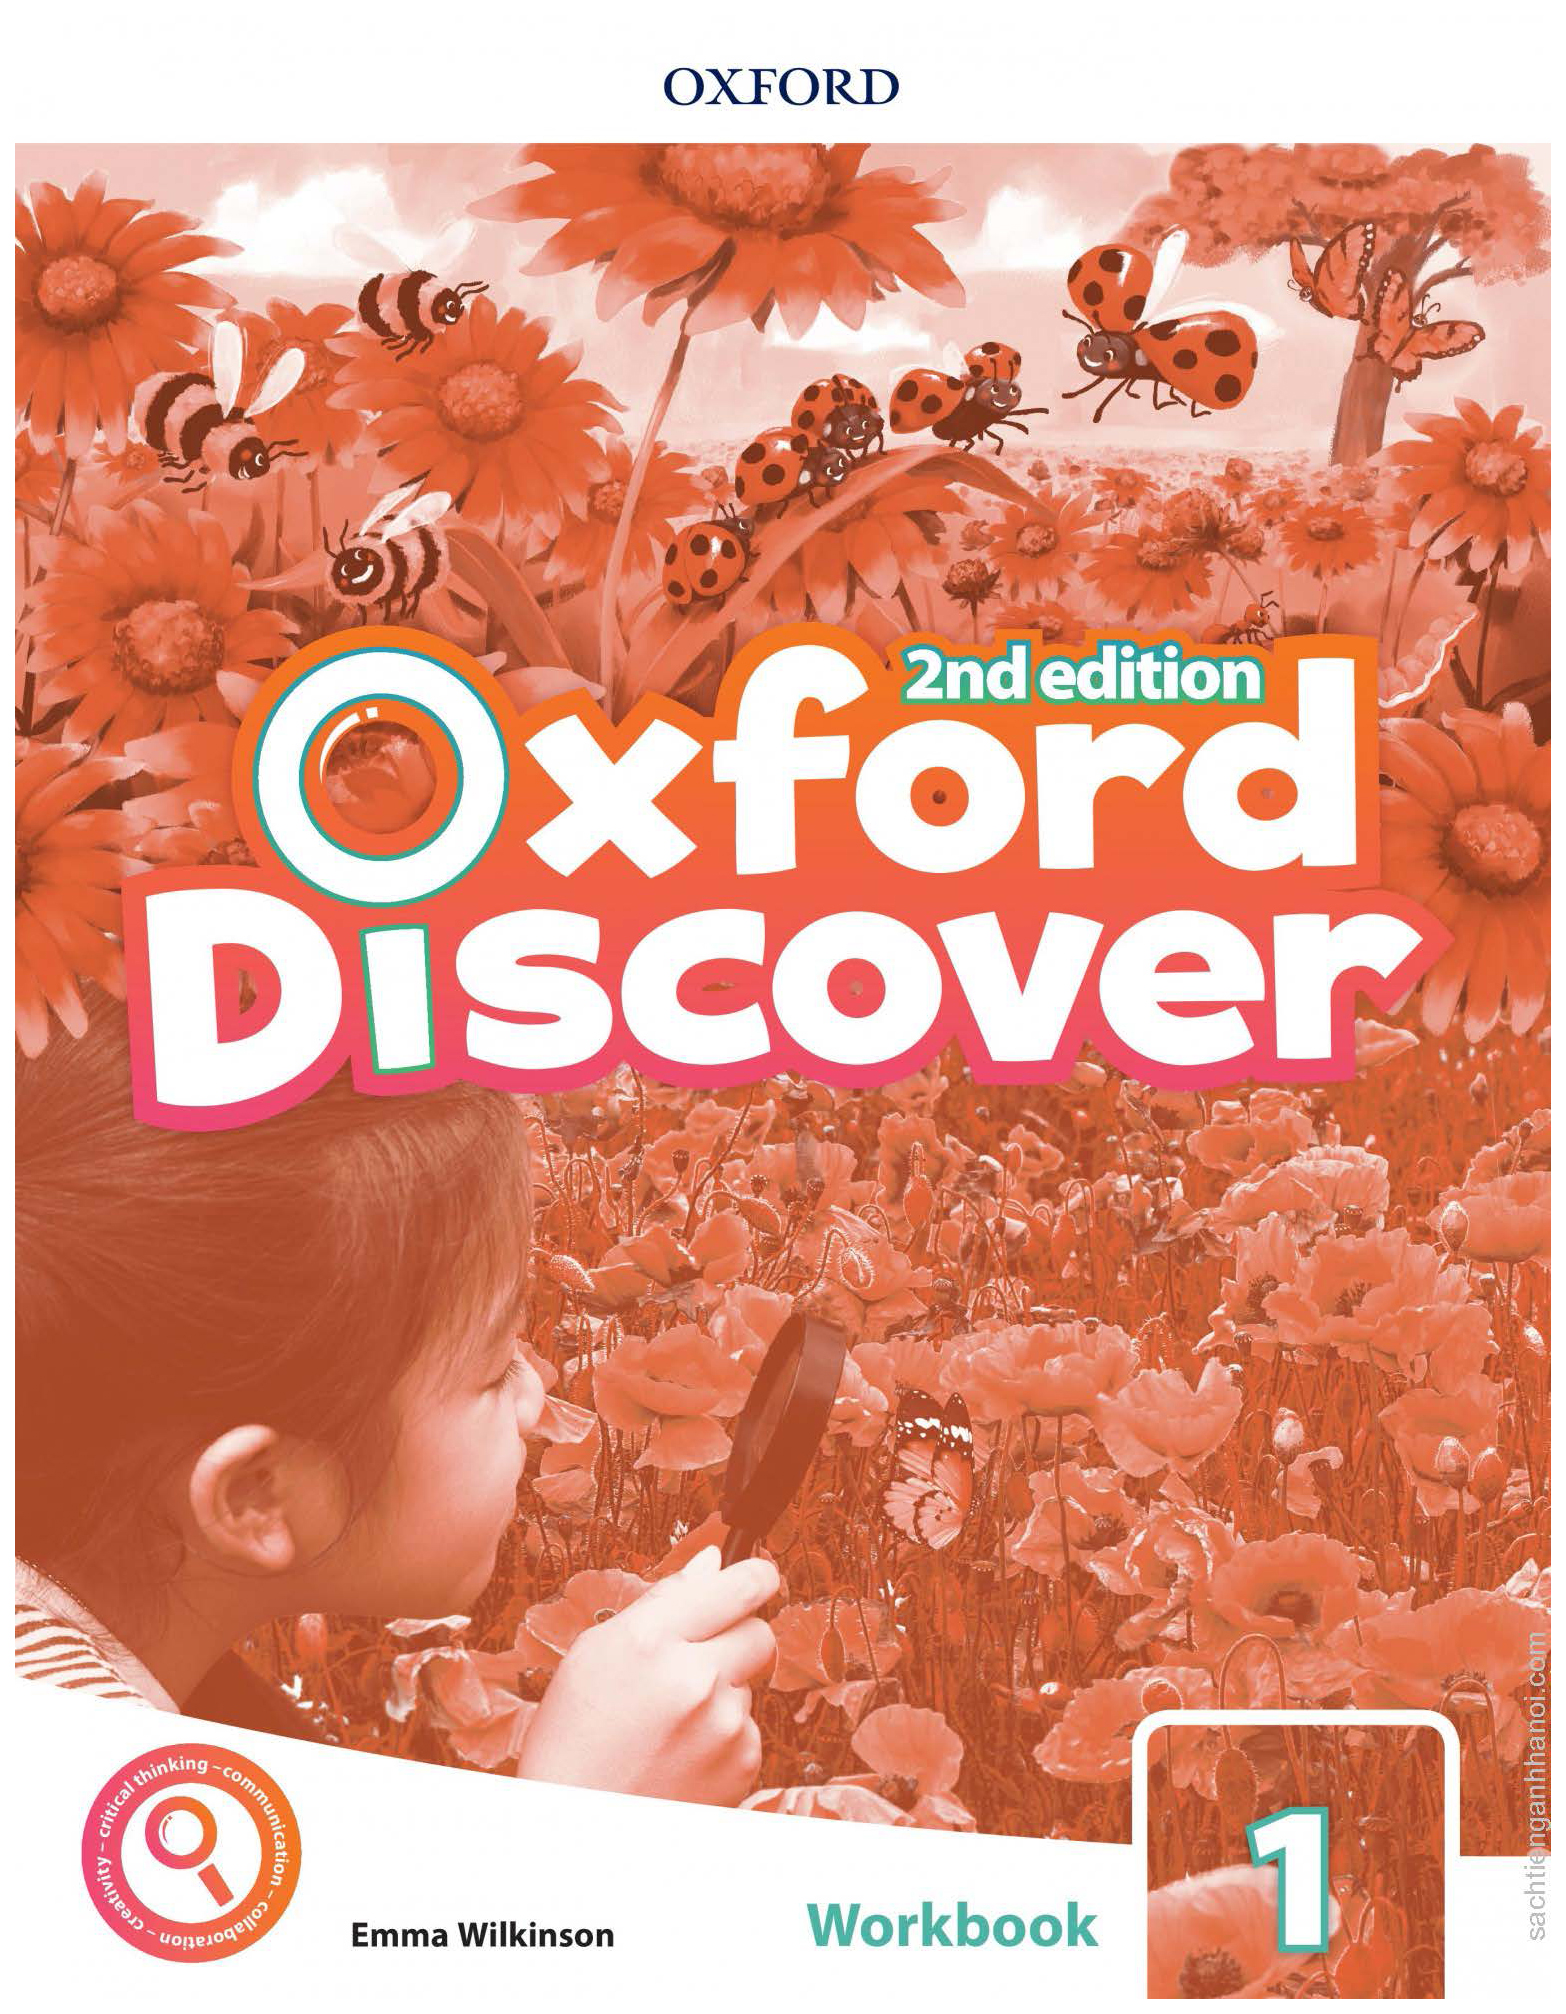 Discover workbook. Workbook Oxford Discovery 1. Oxford discover 1 student book 2nd Edition Audio. Oxford discover 1 student's book 2nd Edition.